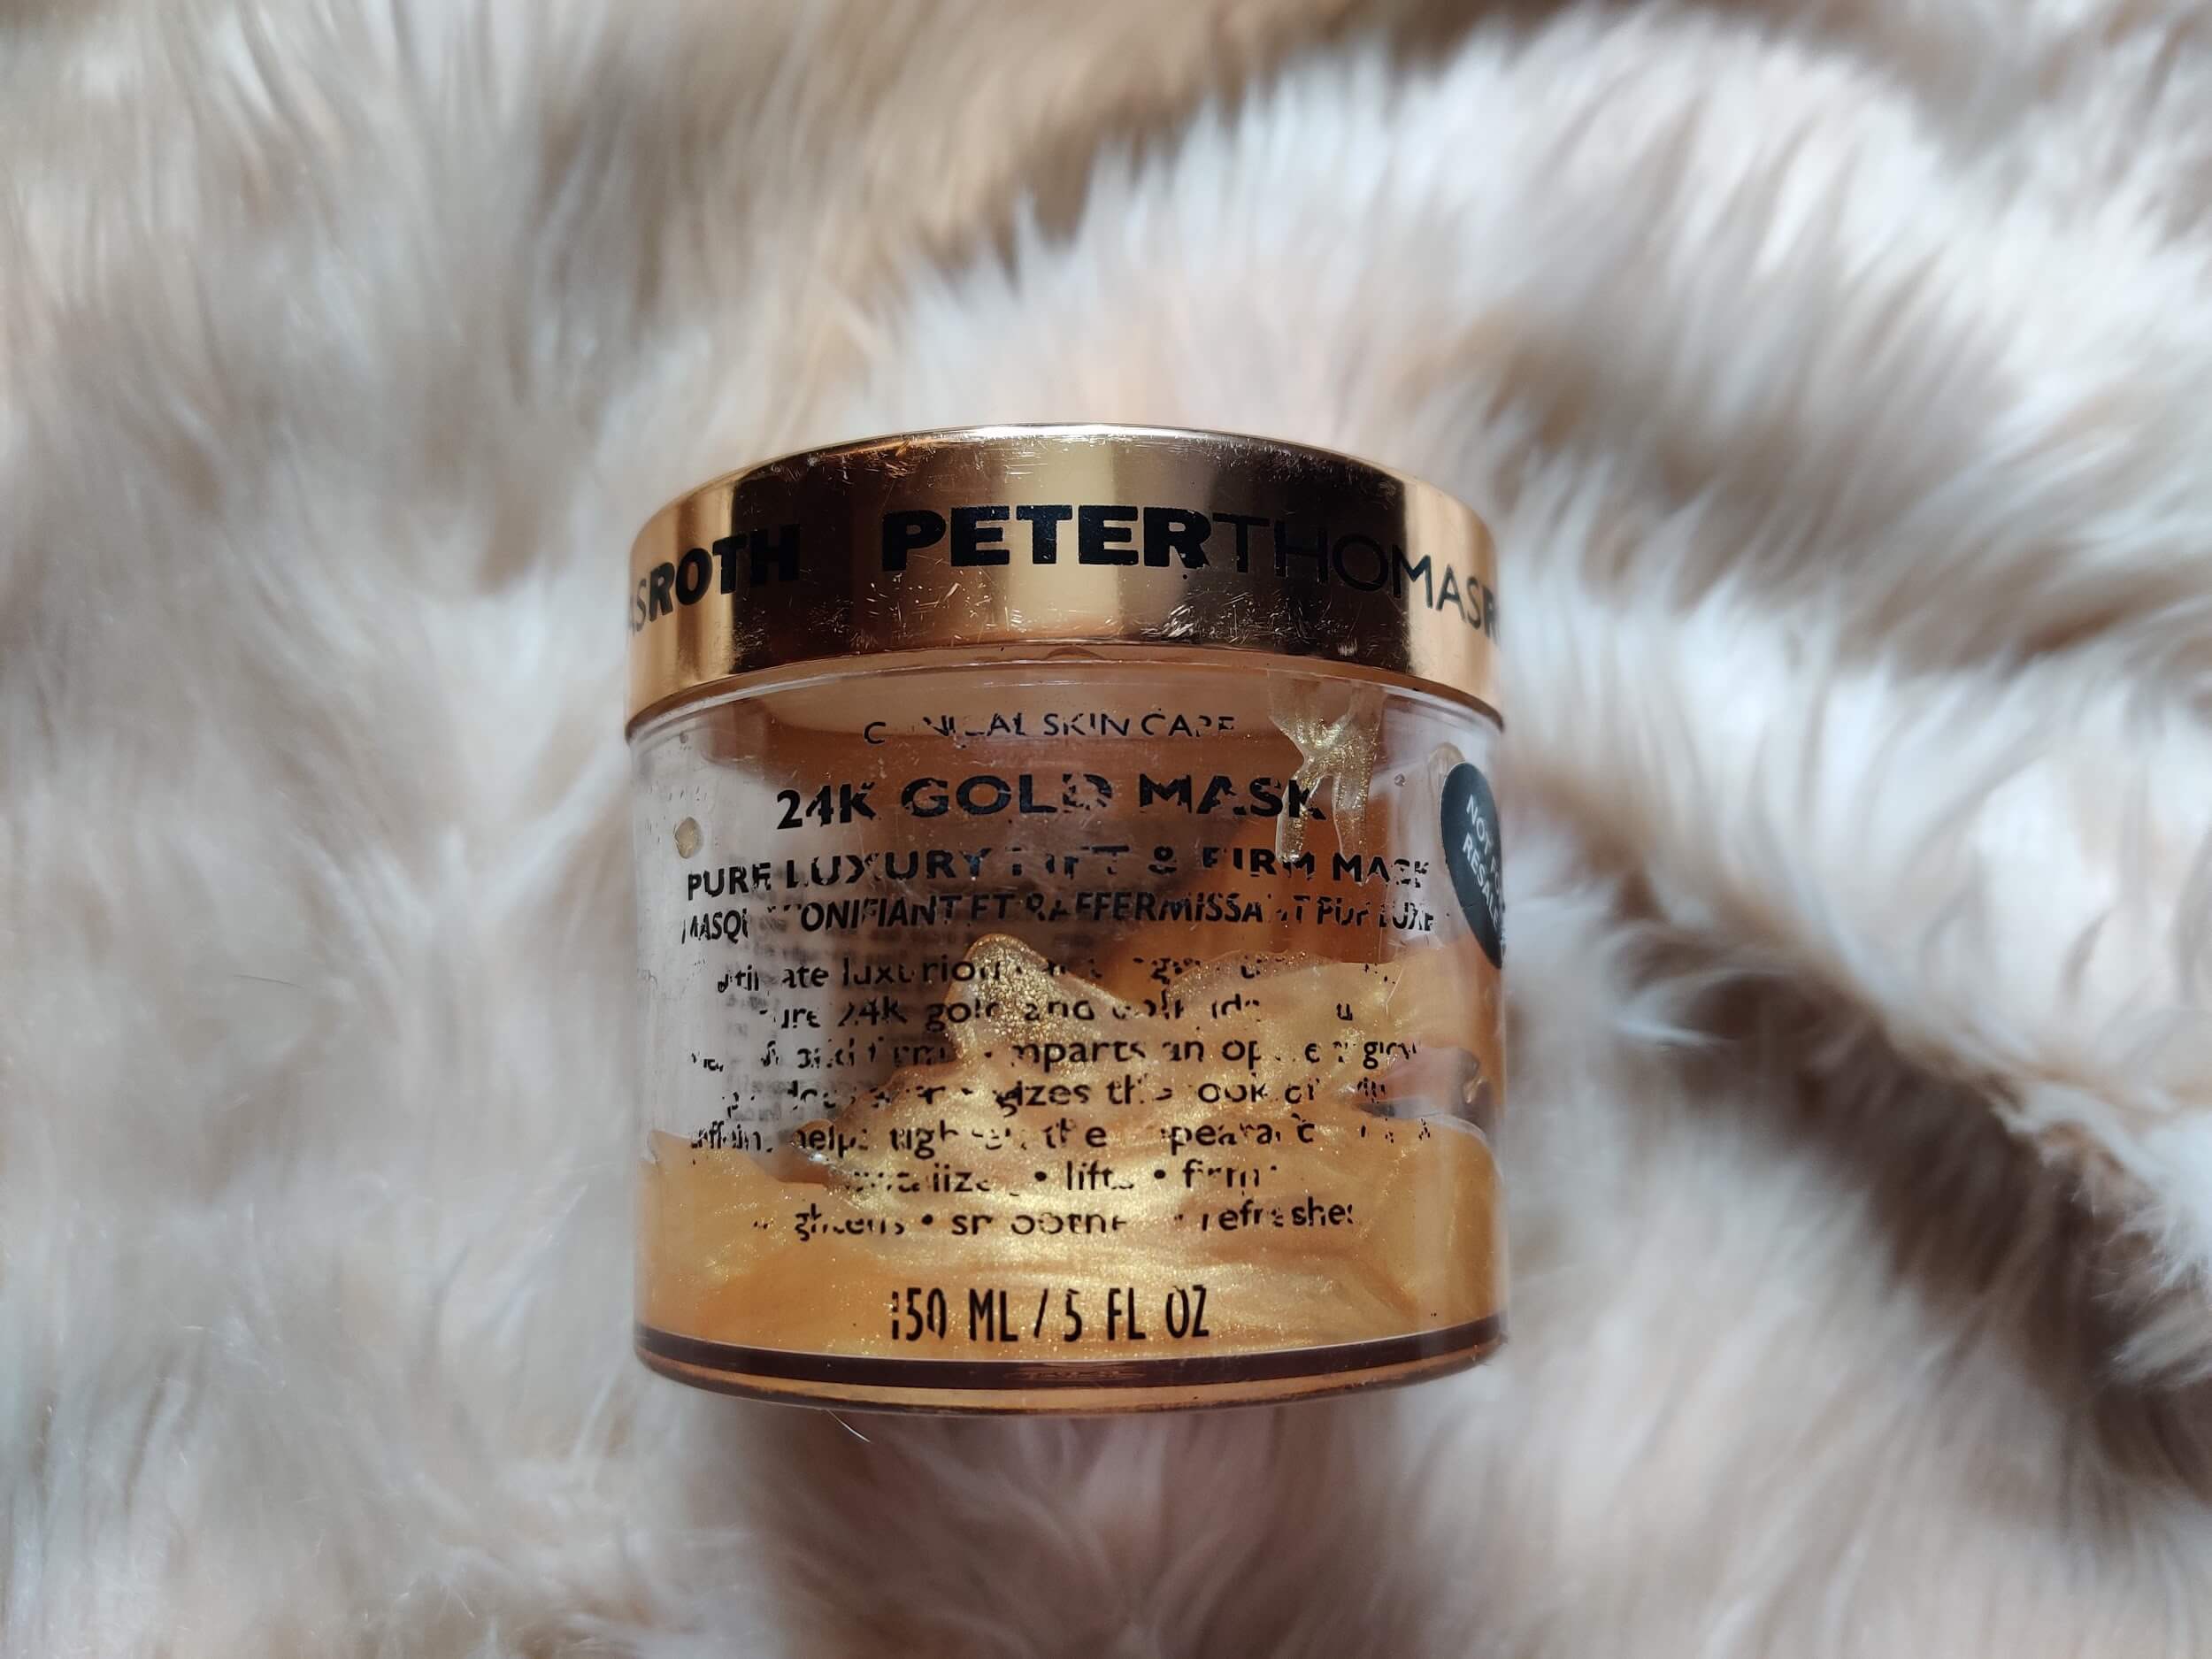 Peter Thomas Roth 24K Gold Mask Luxury Lift & Firm